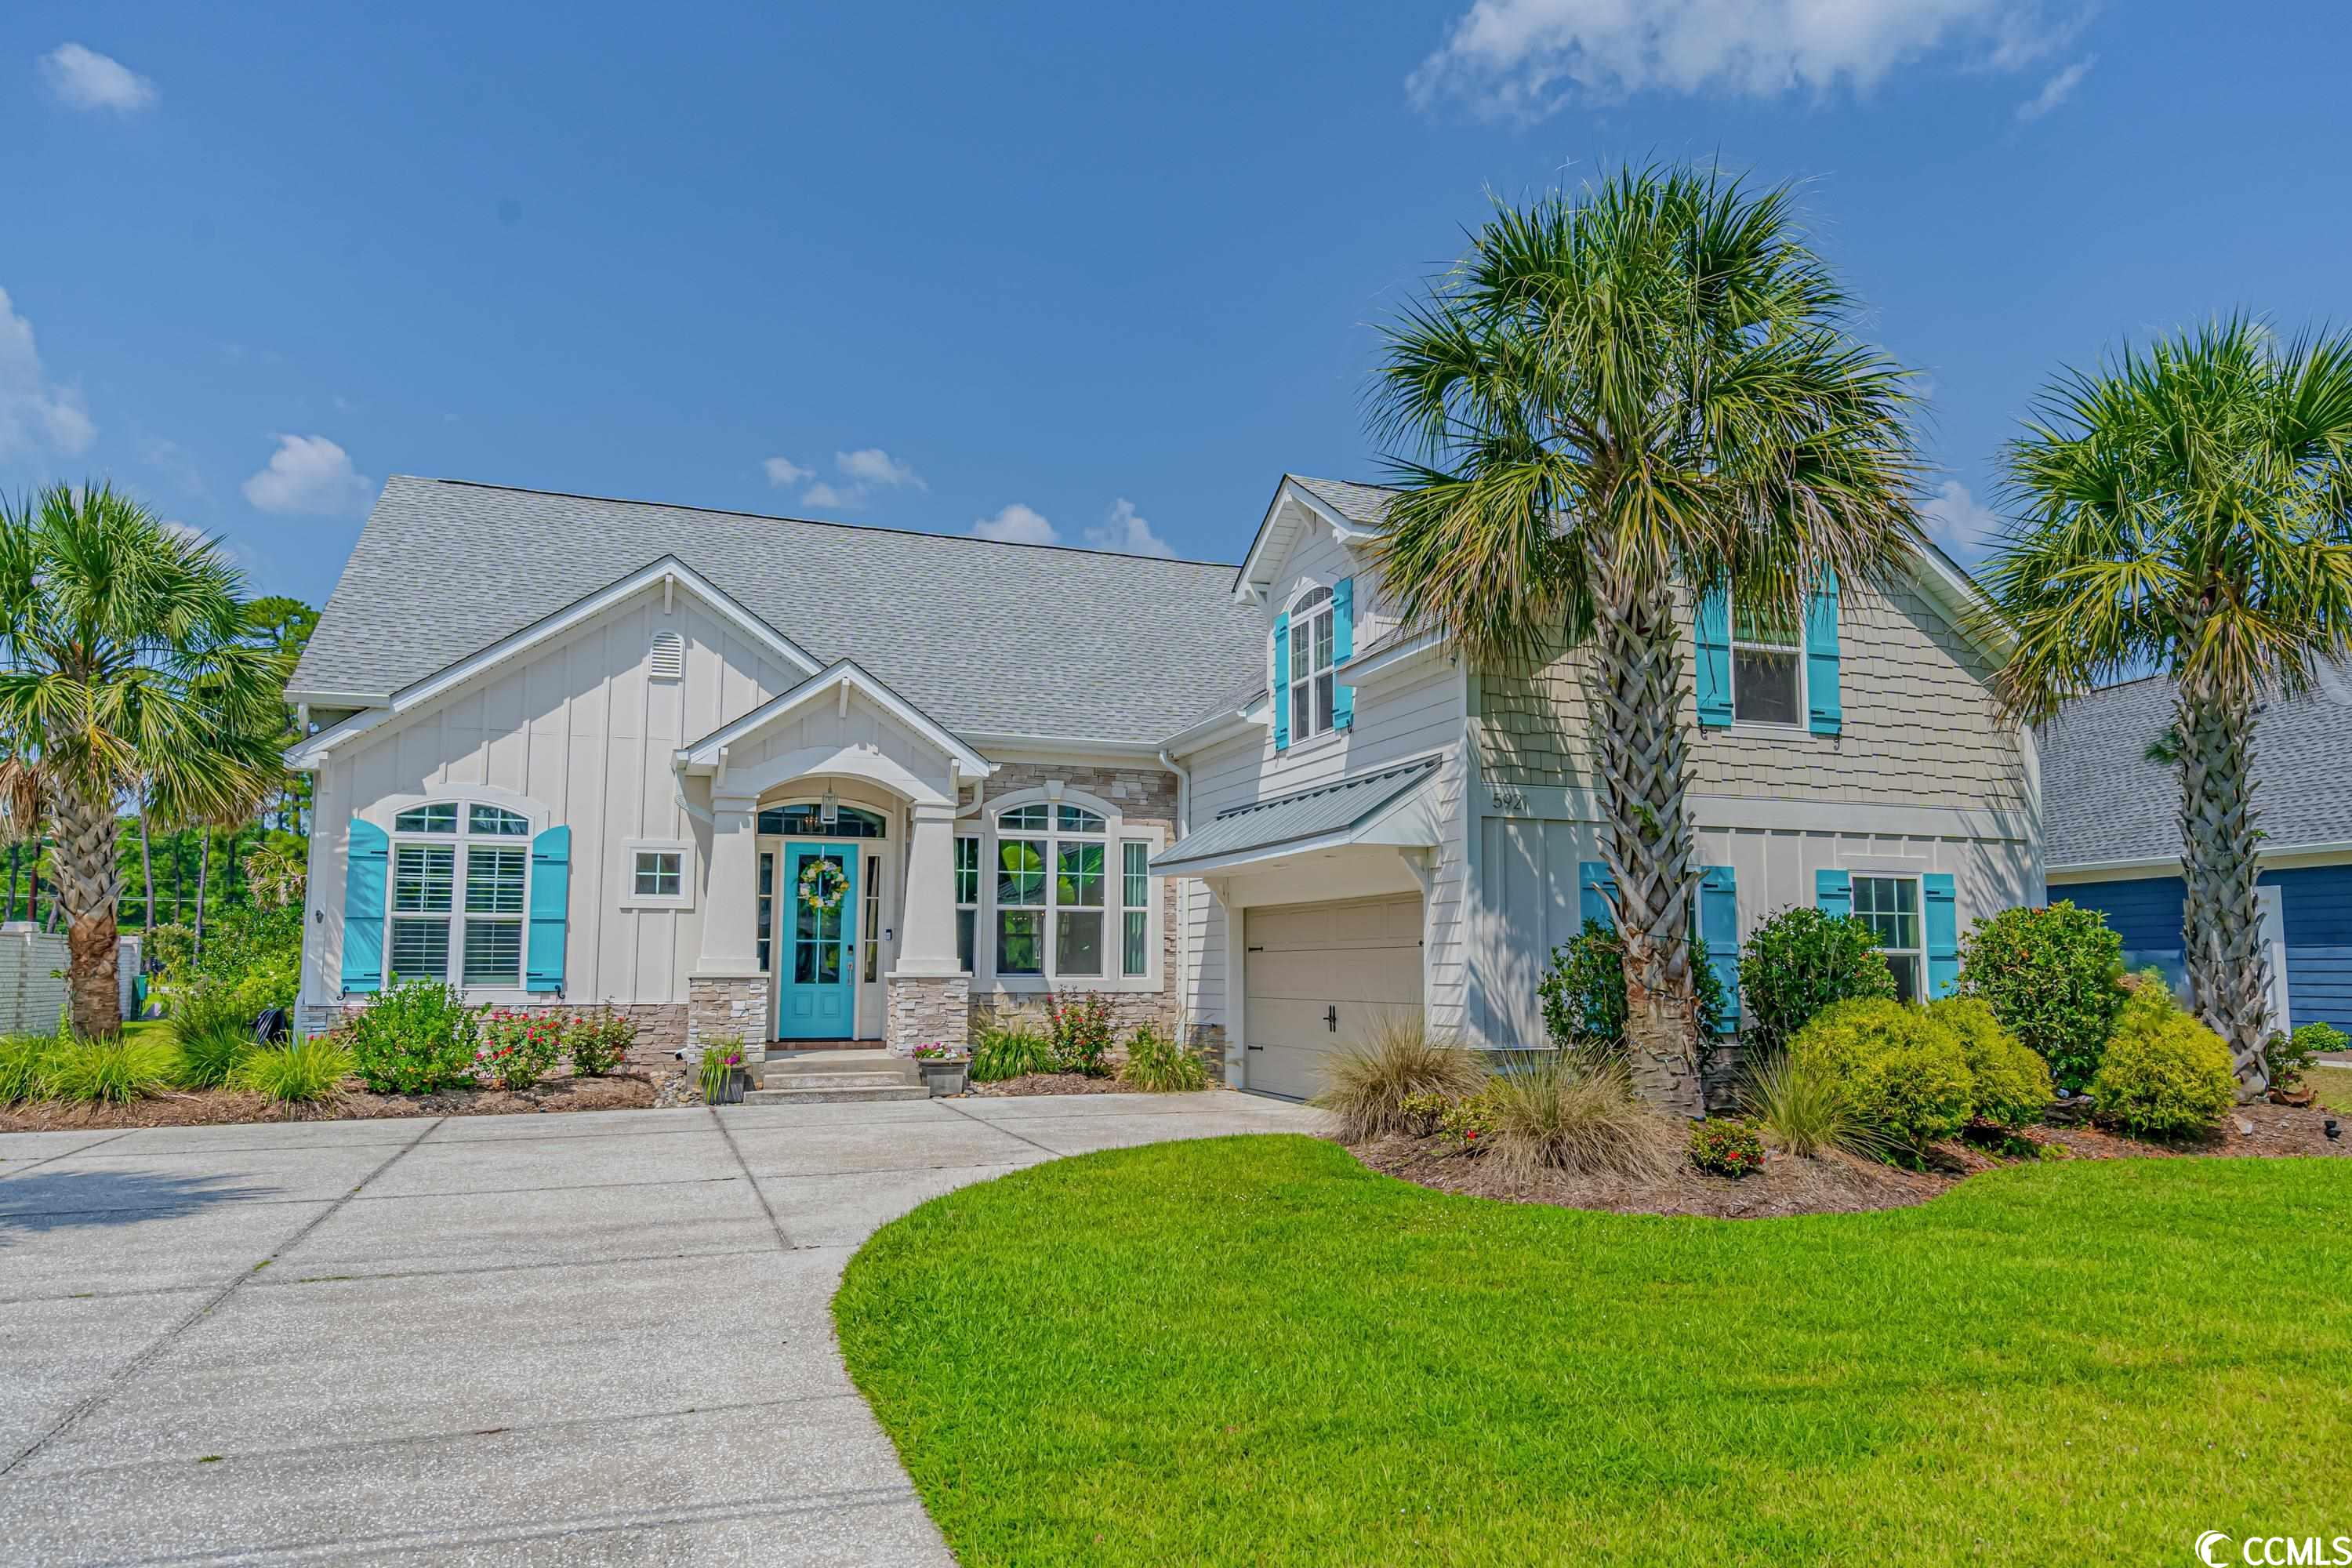 5921 Country Club Dr. Myrtle Beach, SC 29577